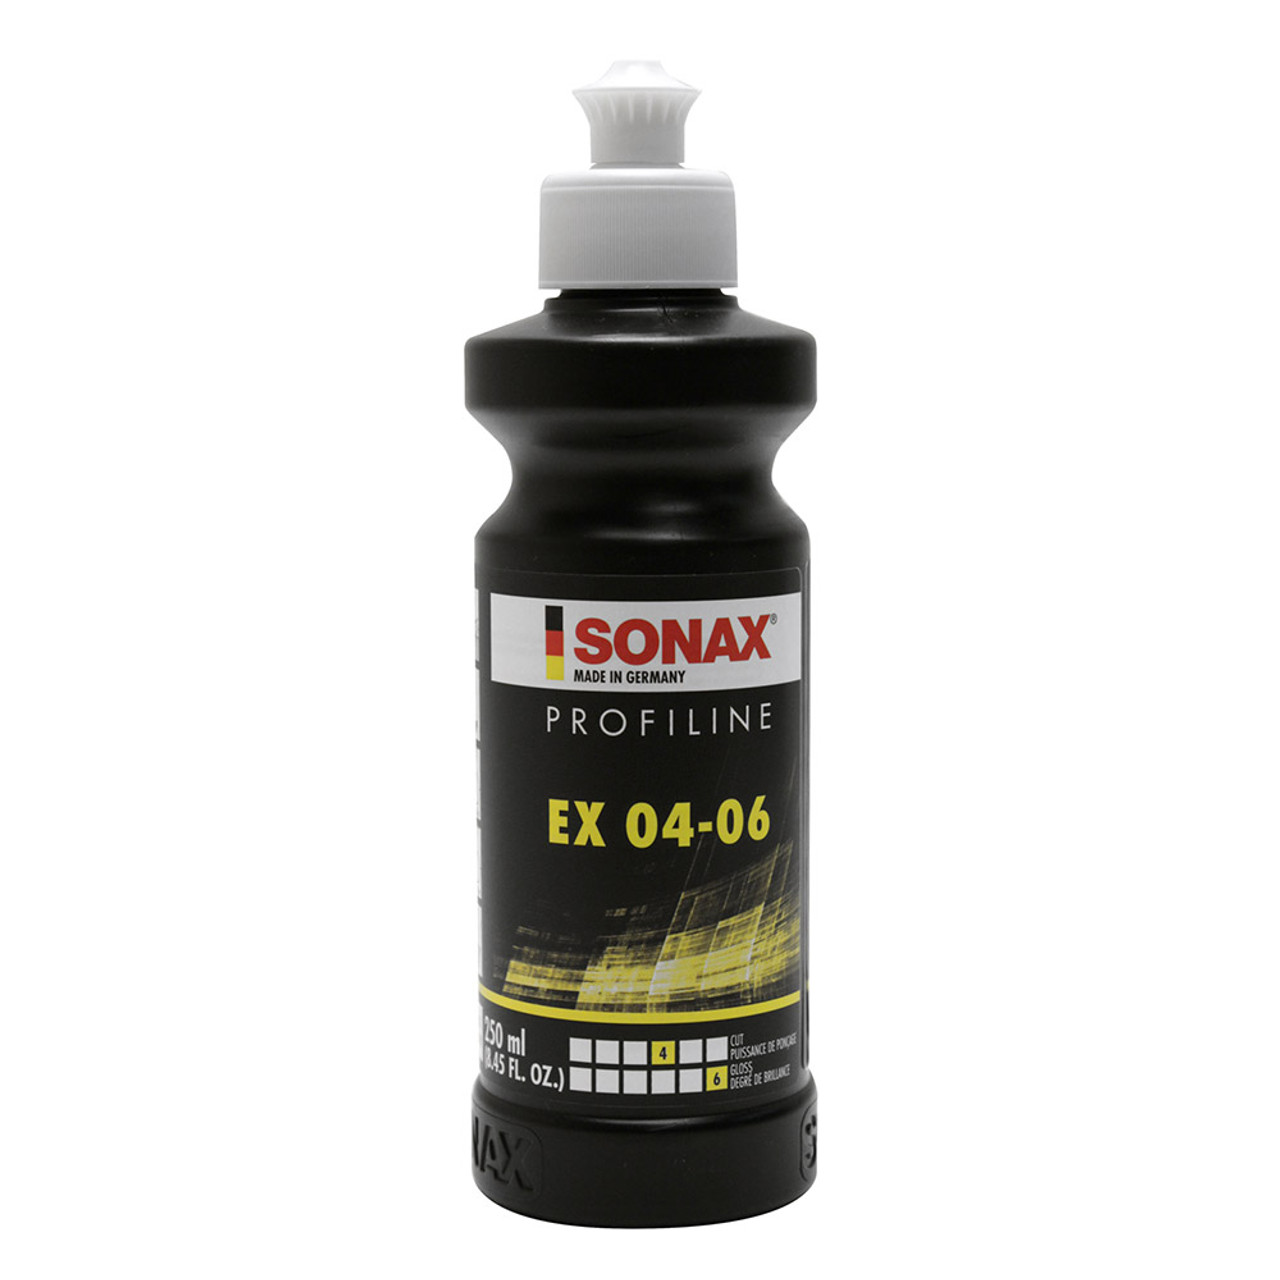 How to use SONAX PROFILINE Speed Protect 